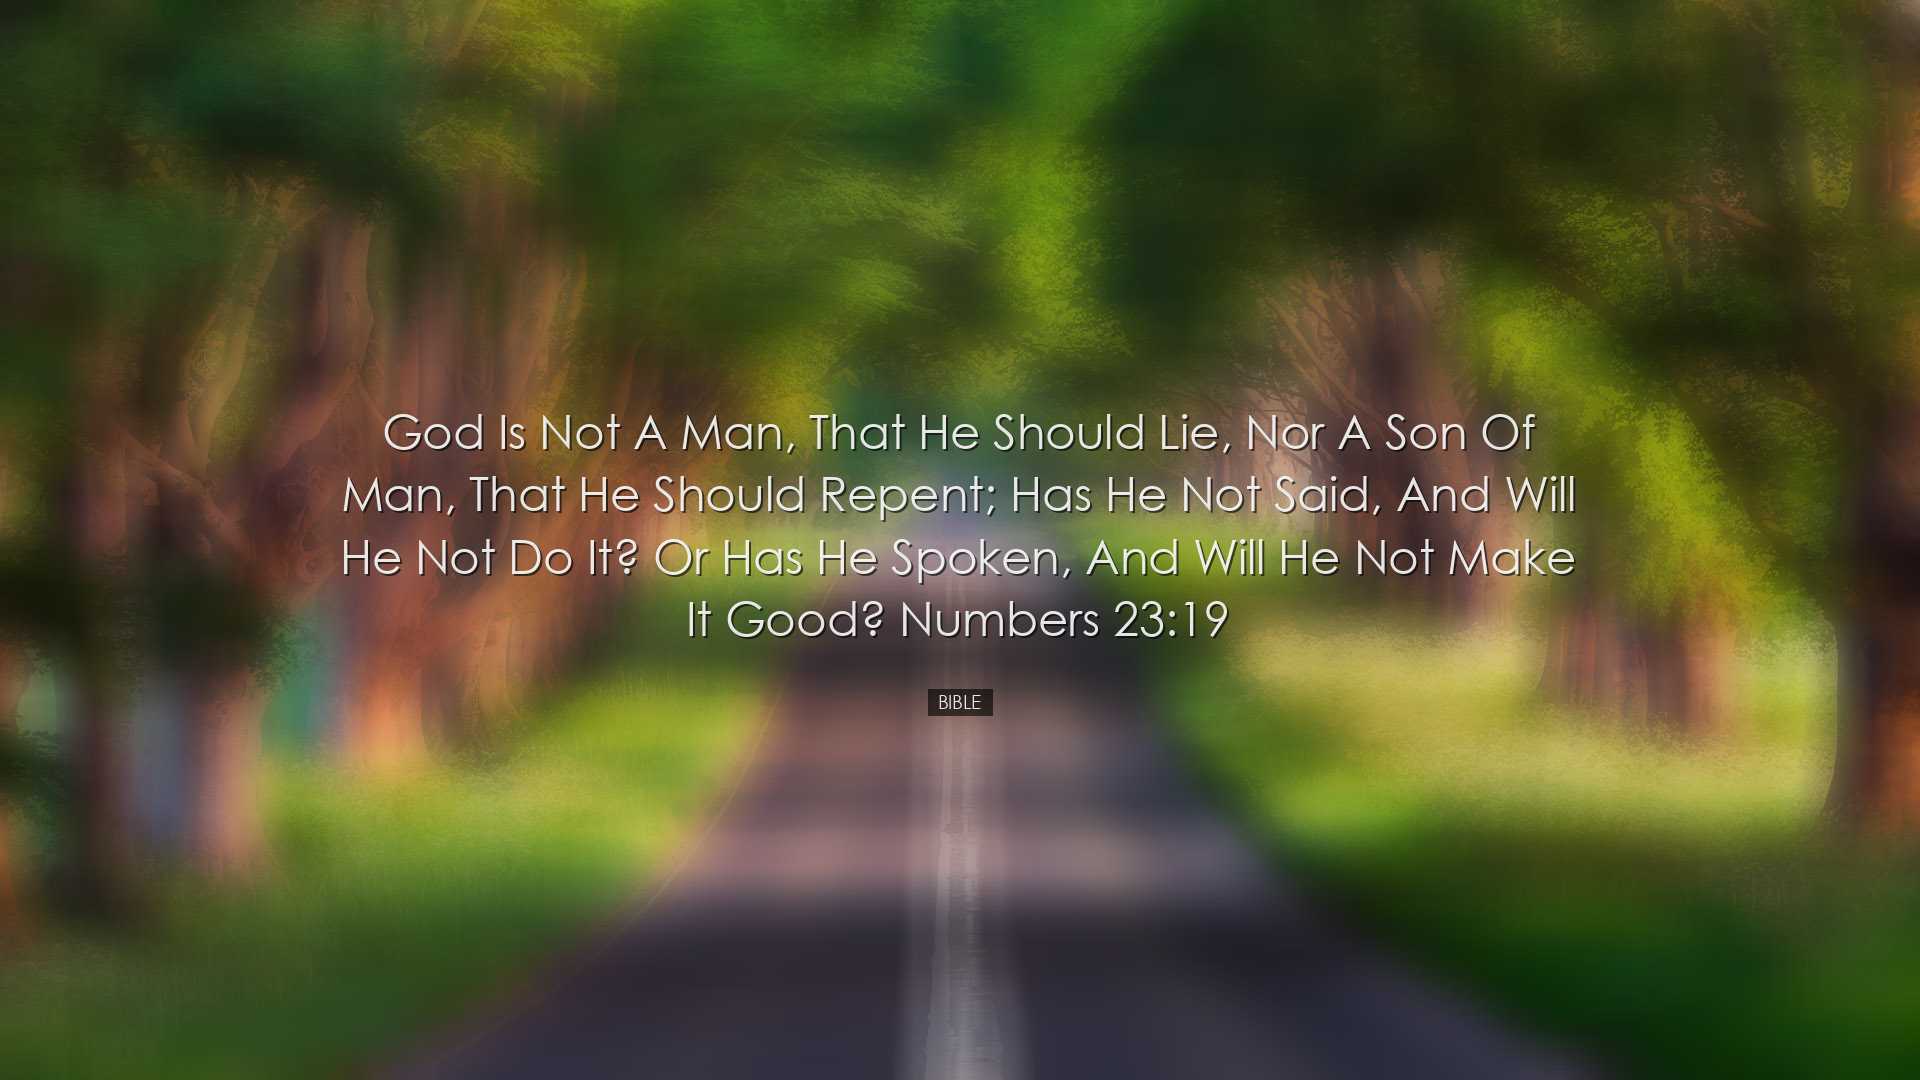 God is not a man, that he should lie, nor a son of man, that he sh